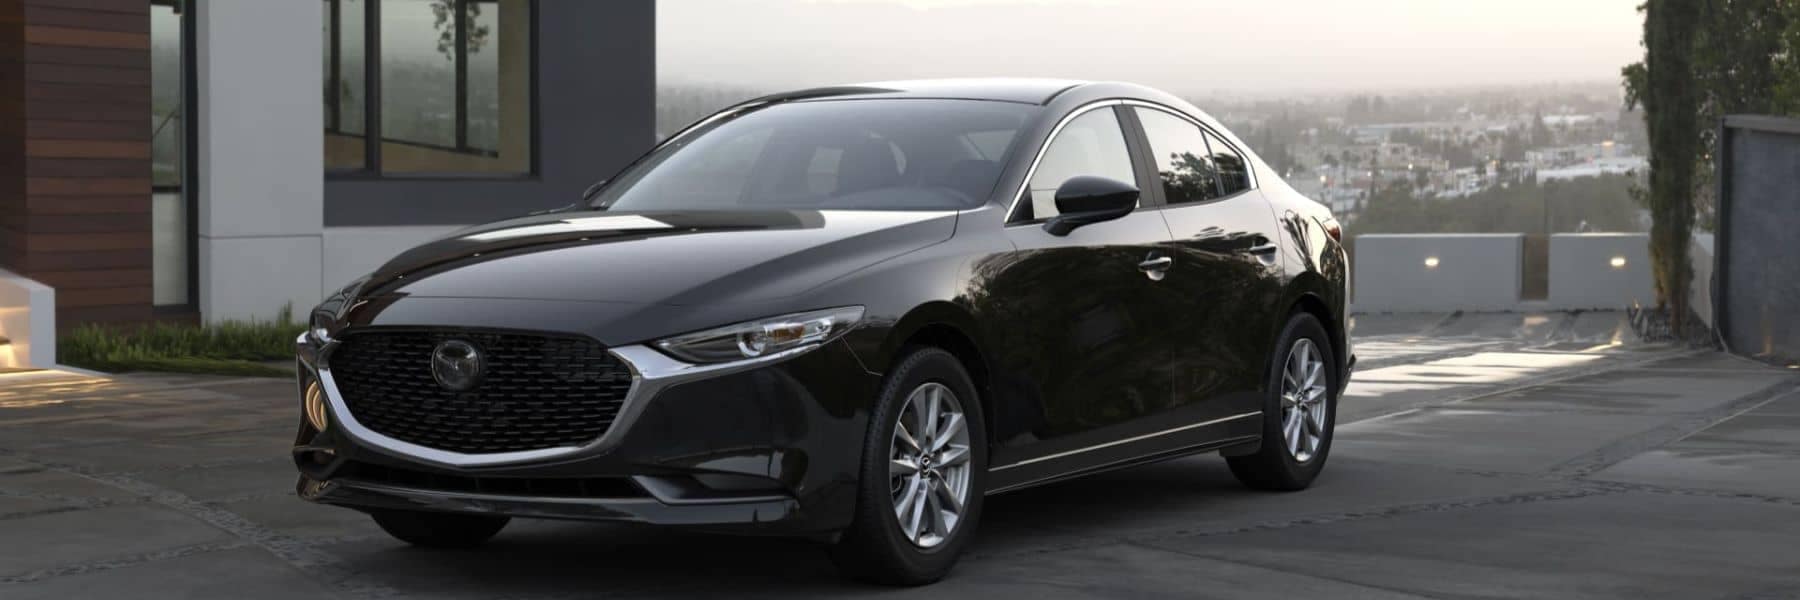 2022-mazda3-sedan-front-3qview-parked-house-driveway-cityview-black